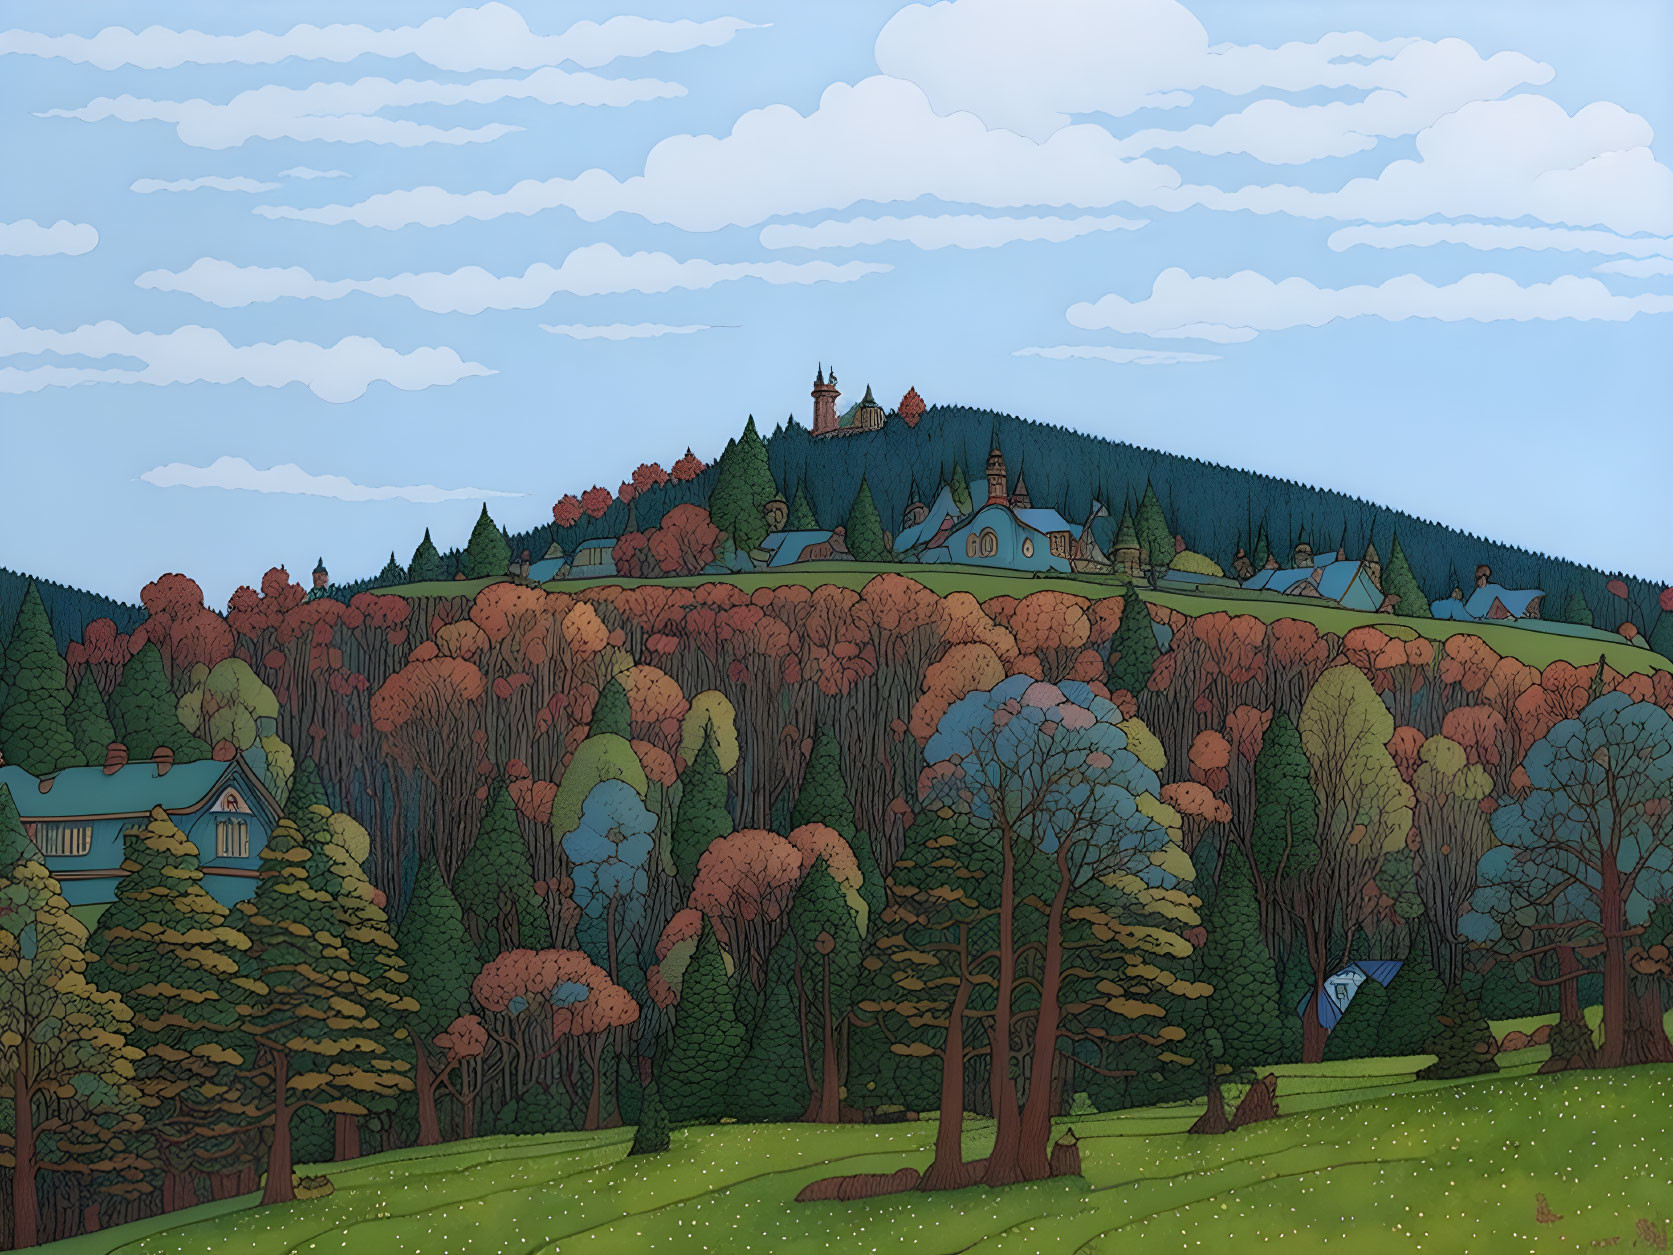 Vibrant stylized autumn landscape with rolling hills and scattered houses